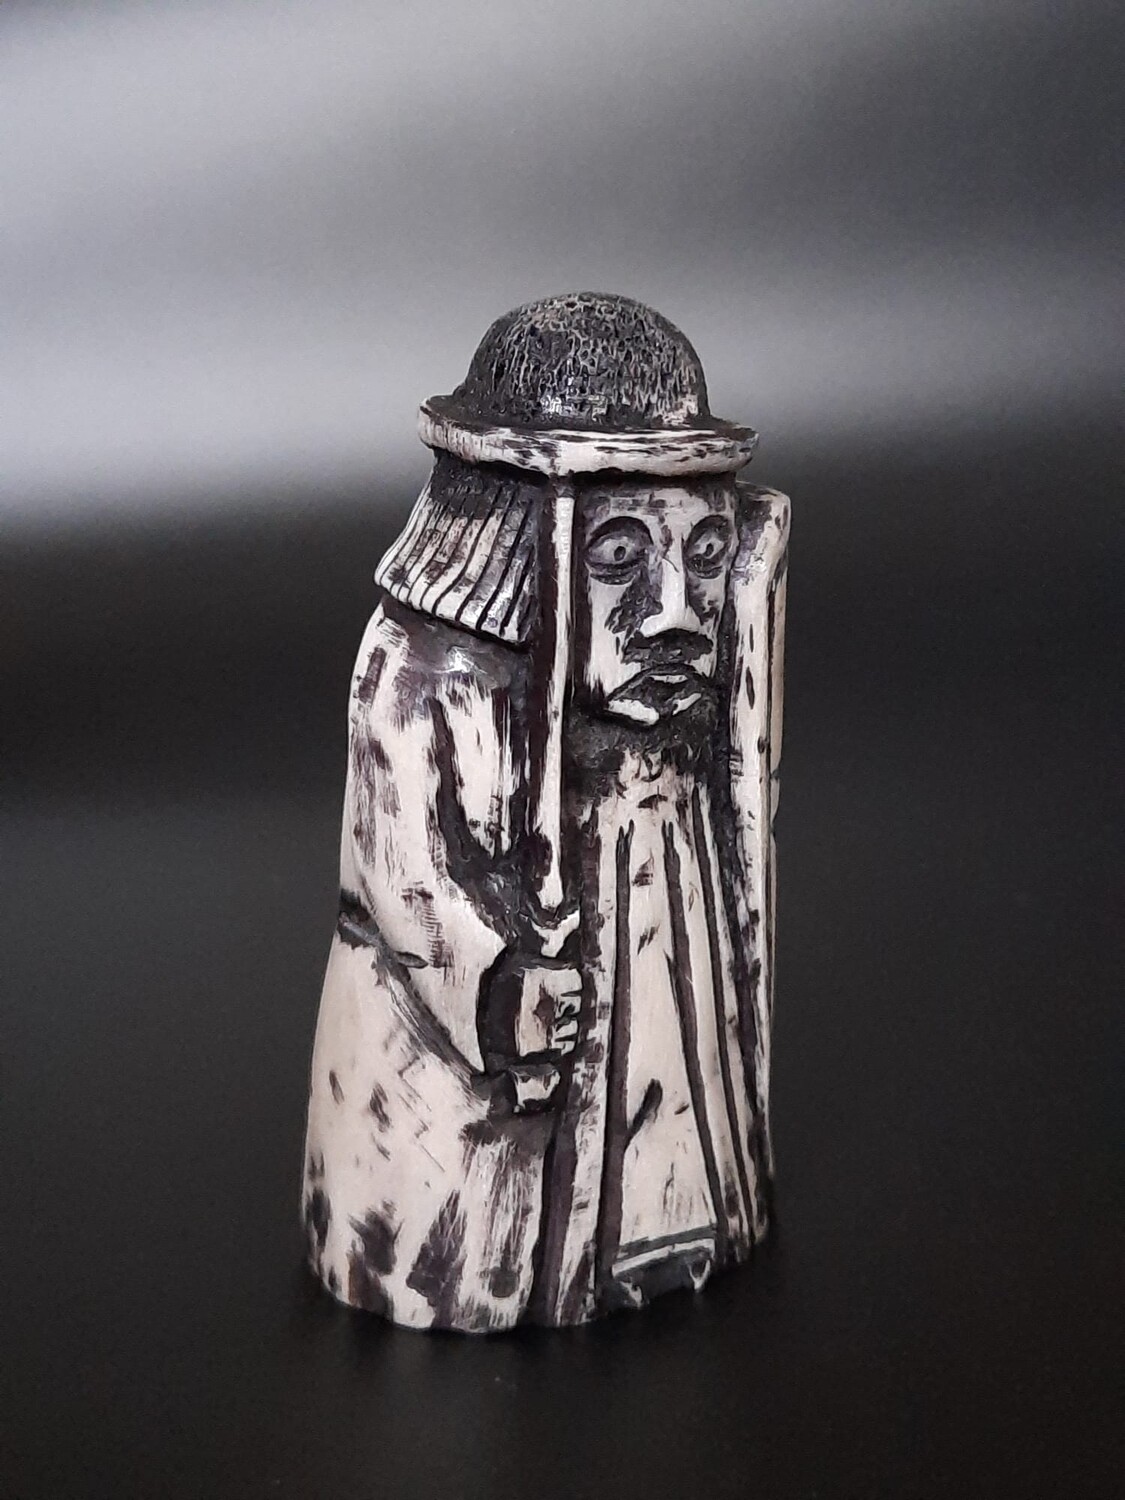 Handmade in bone Lewis Chessmen Set Rook with Sword and Kite Shaped Shield, unique Moose Antlers carving